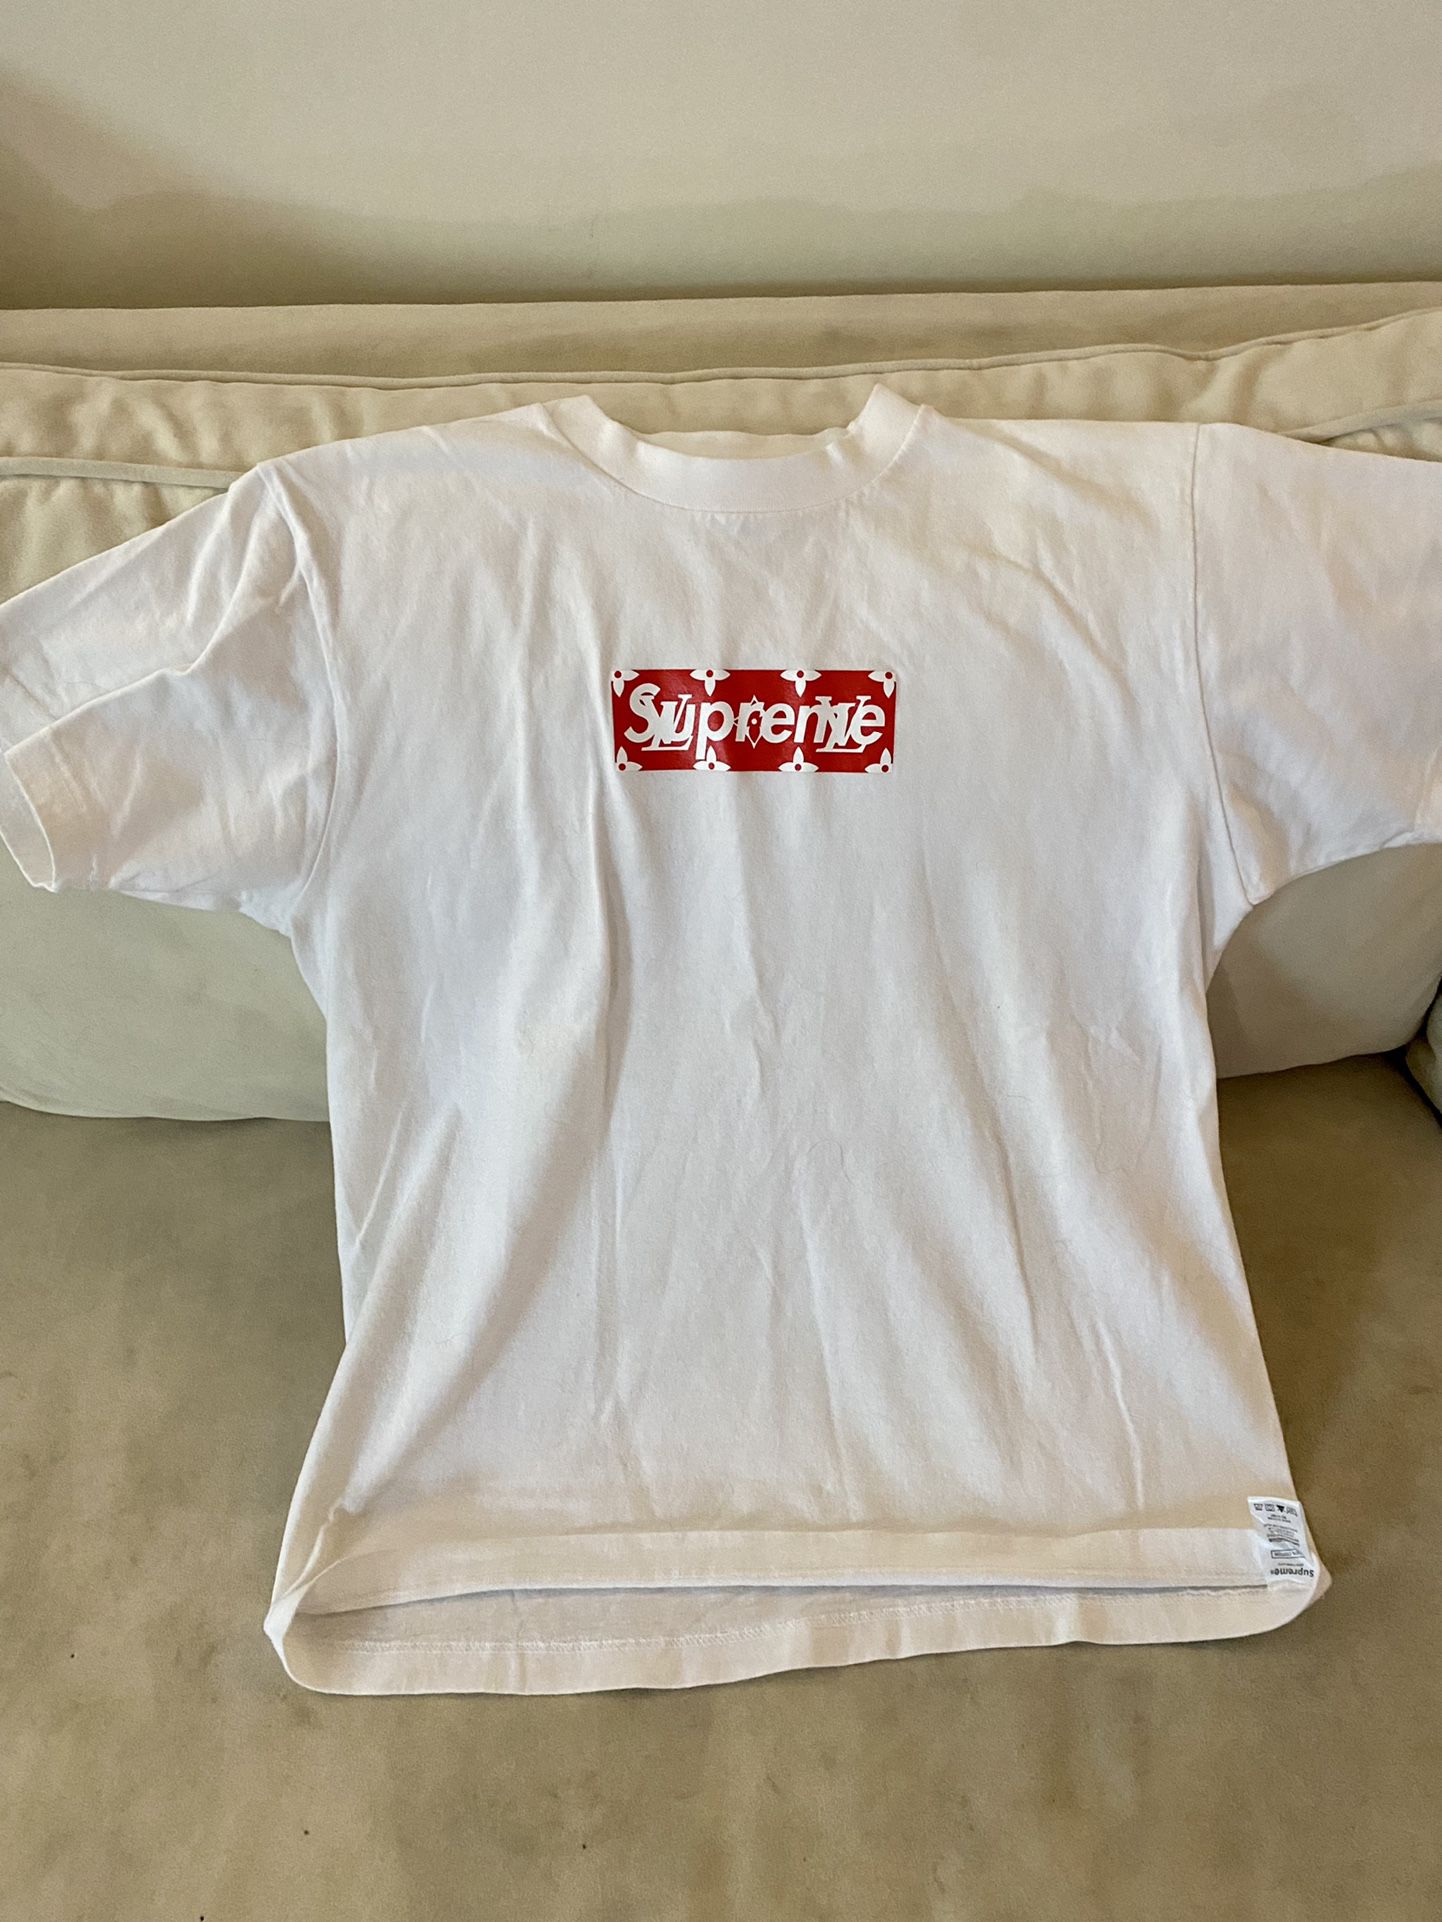 Supreme T-shirt X Louis Vuitton Red And White Flower Designed Box Logo On Front Super Rare!